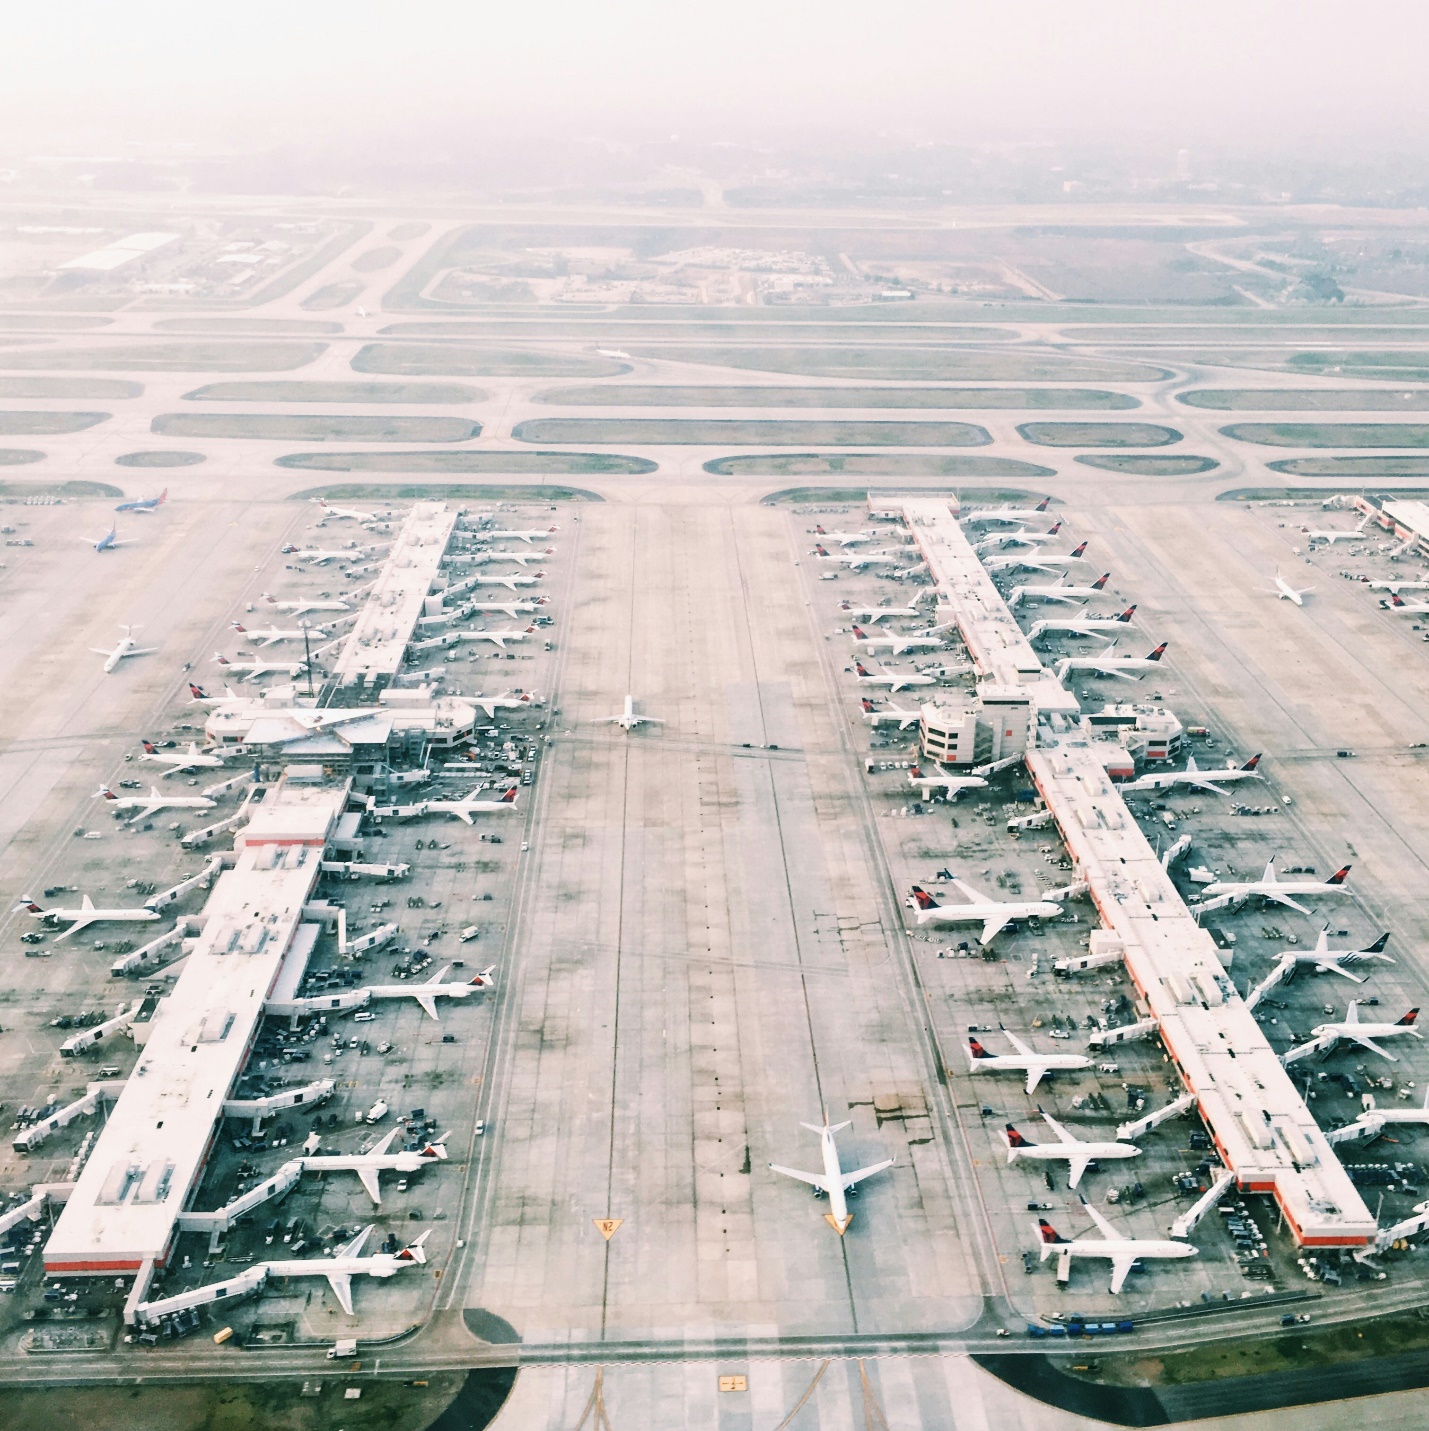 Securing Airports With AI Security and Active Shooter Detection Systems